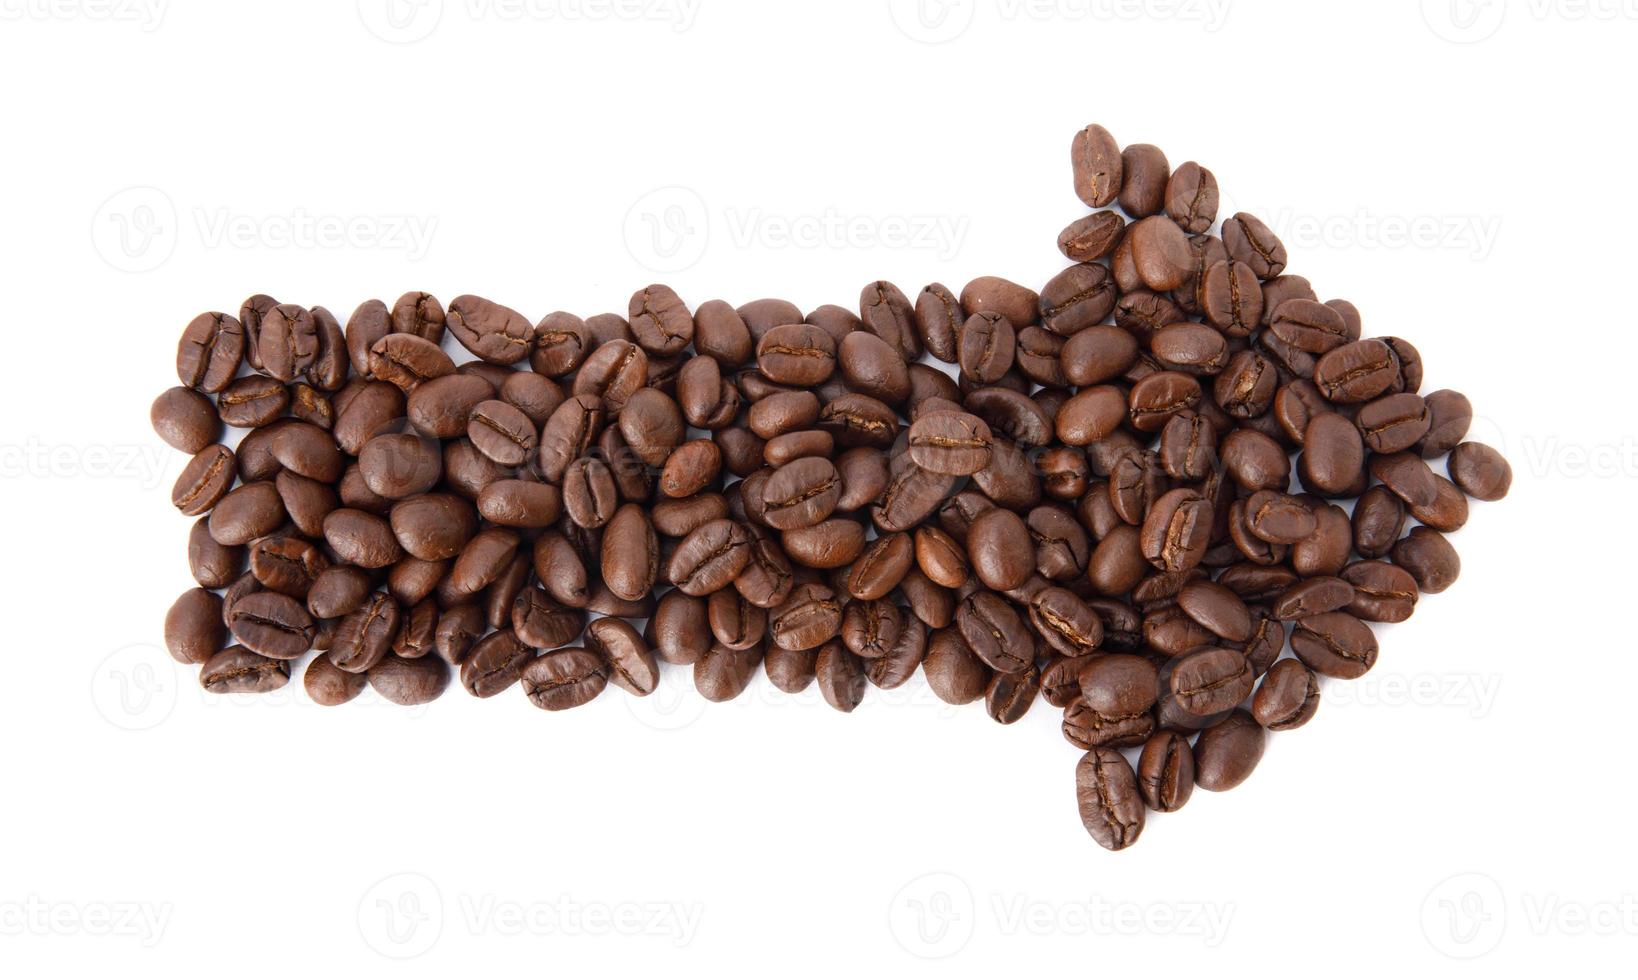 Roasted coffee beans in the shape of arrow studio shot isolated on white background, Healthy products by organic natural ingredients concept photo